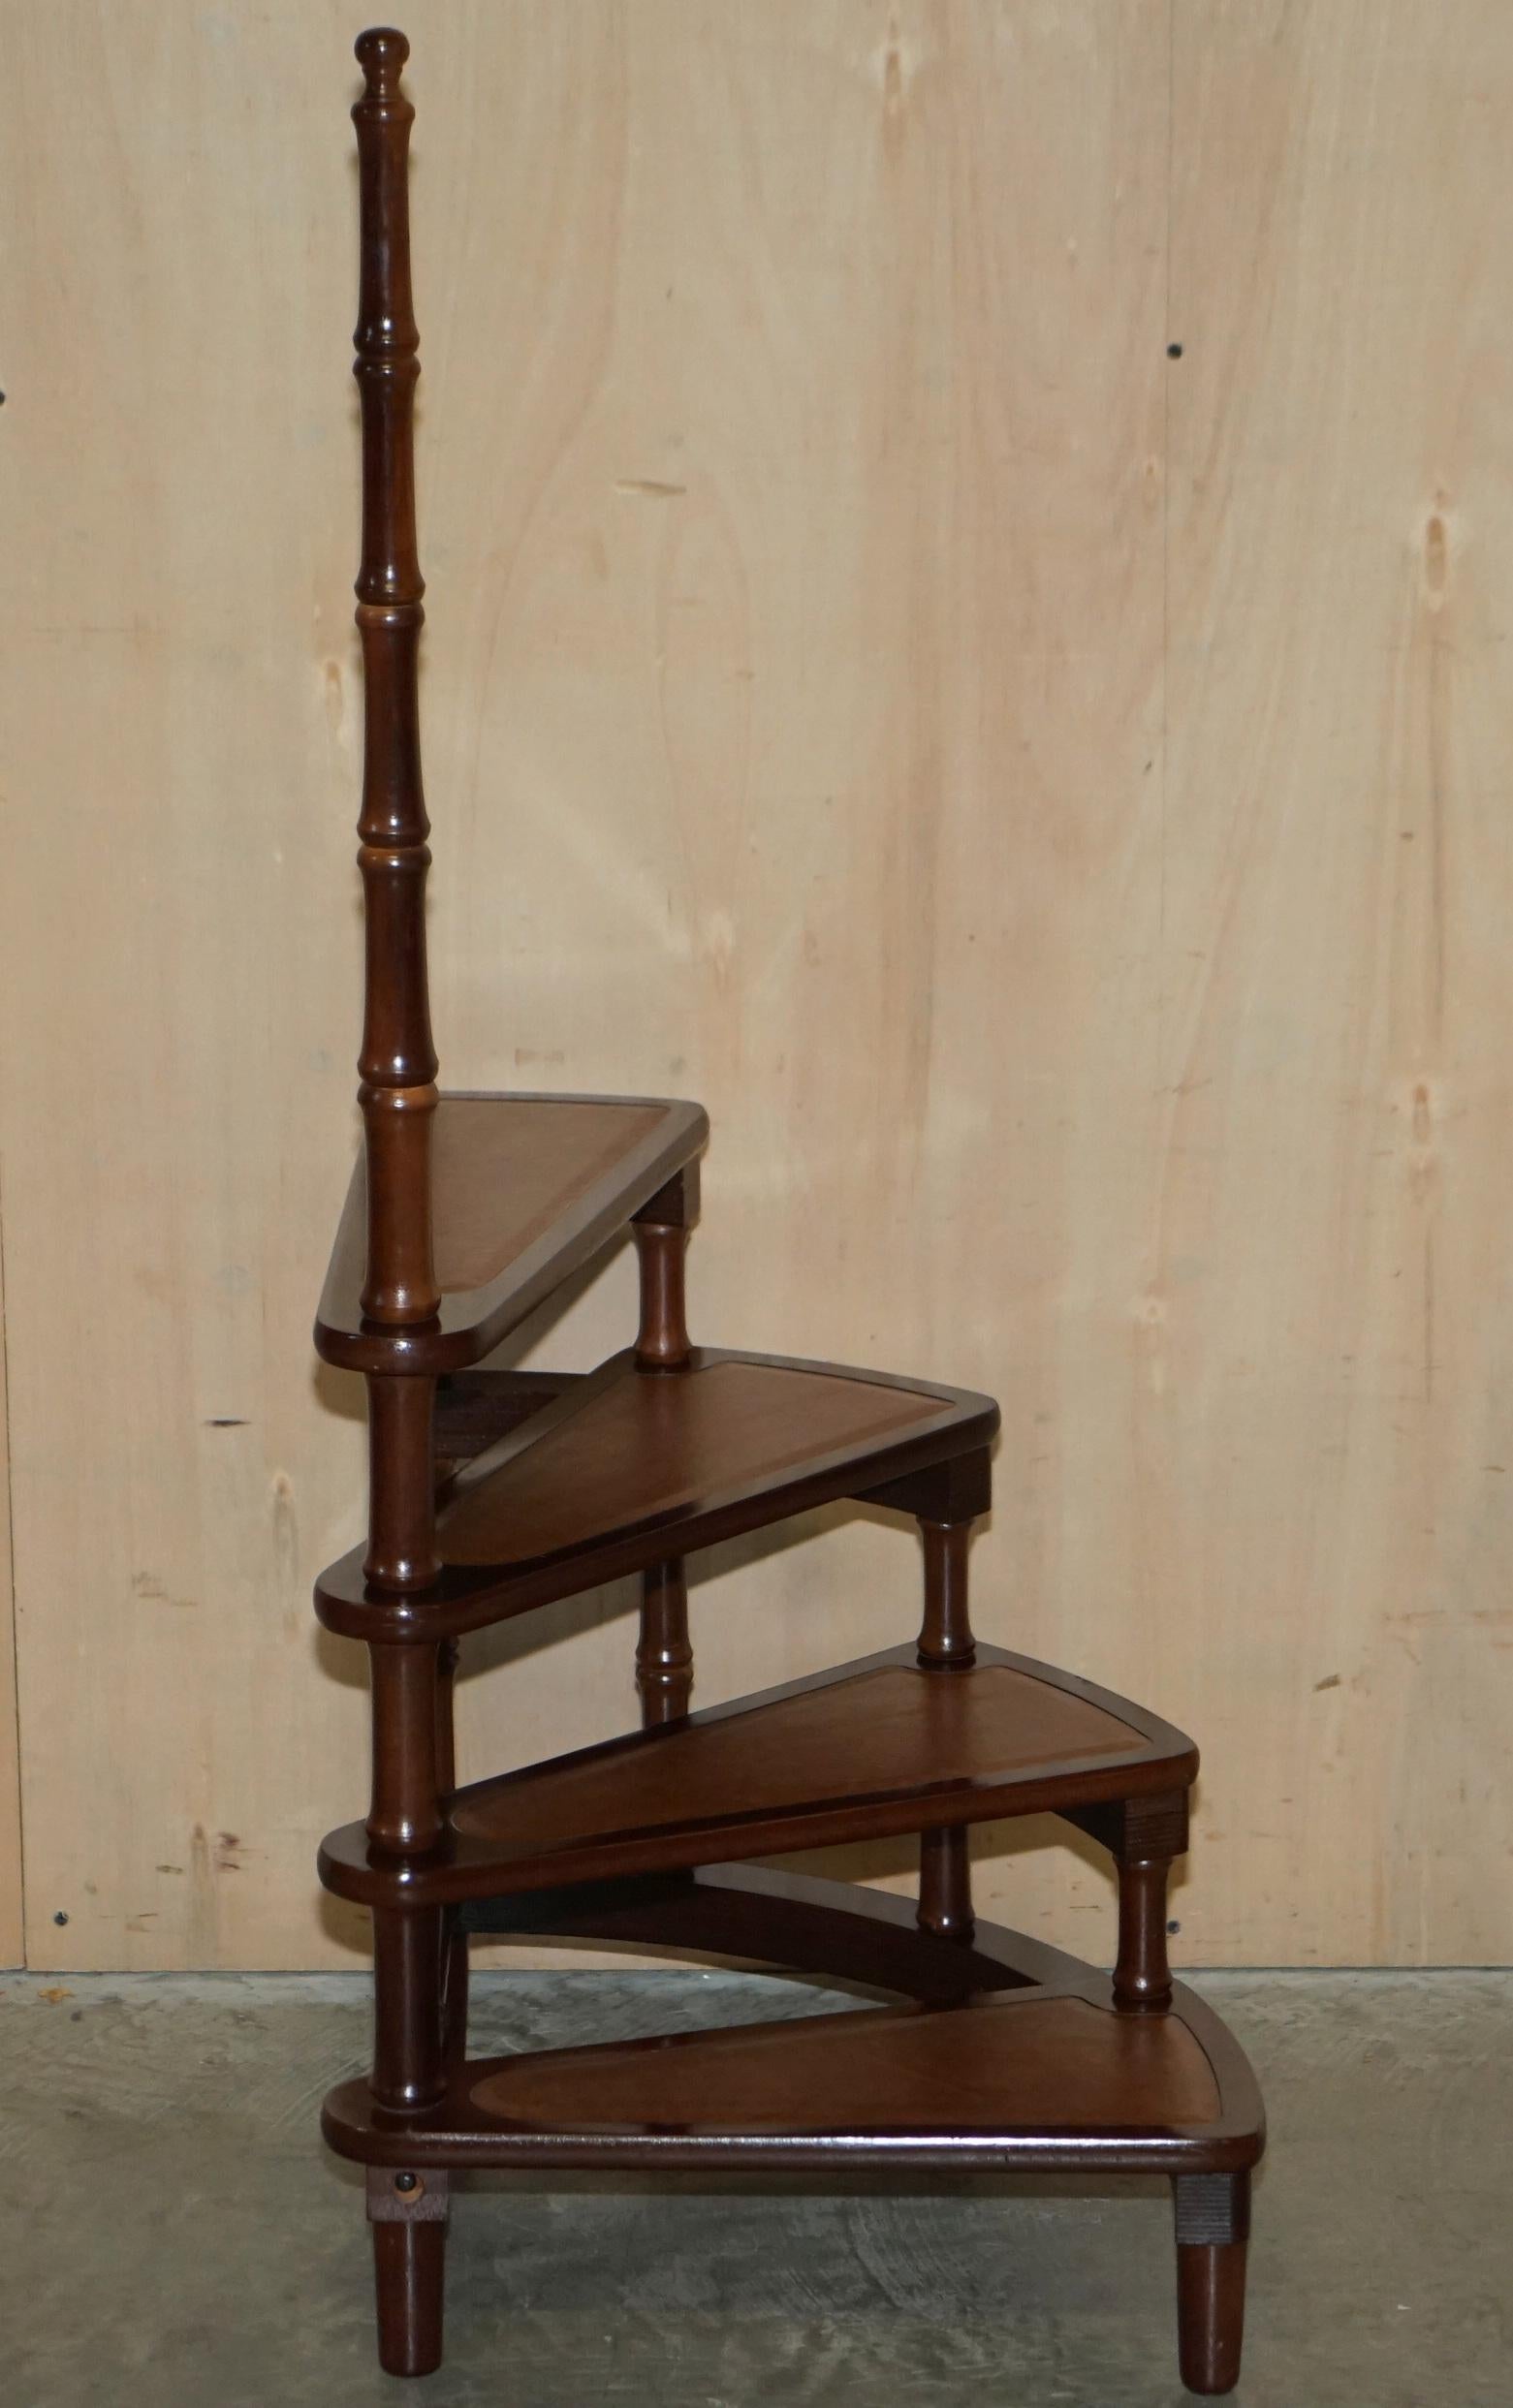 We are delighted to offer for sale this lovely Georgian style vintage hardwood & brown leather library steps 

A very good looking and decorative set of georgian style library steps, used for the functionality of accessing the top shelves on a